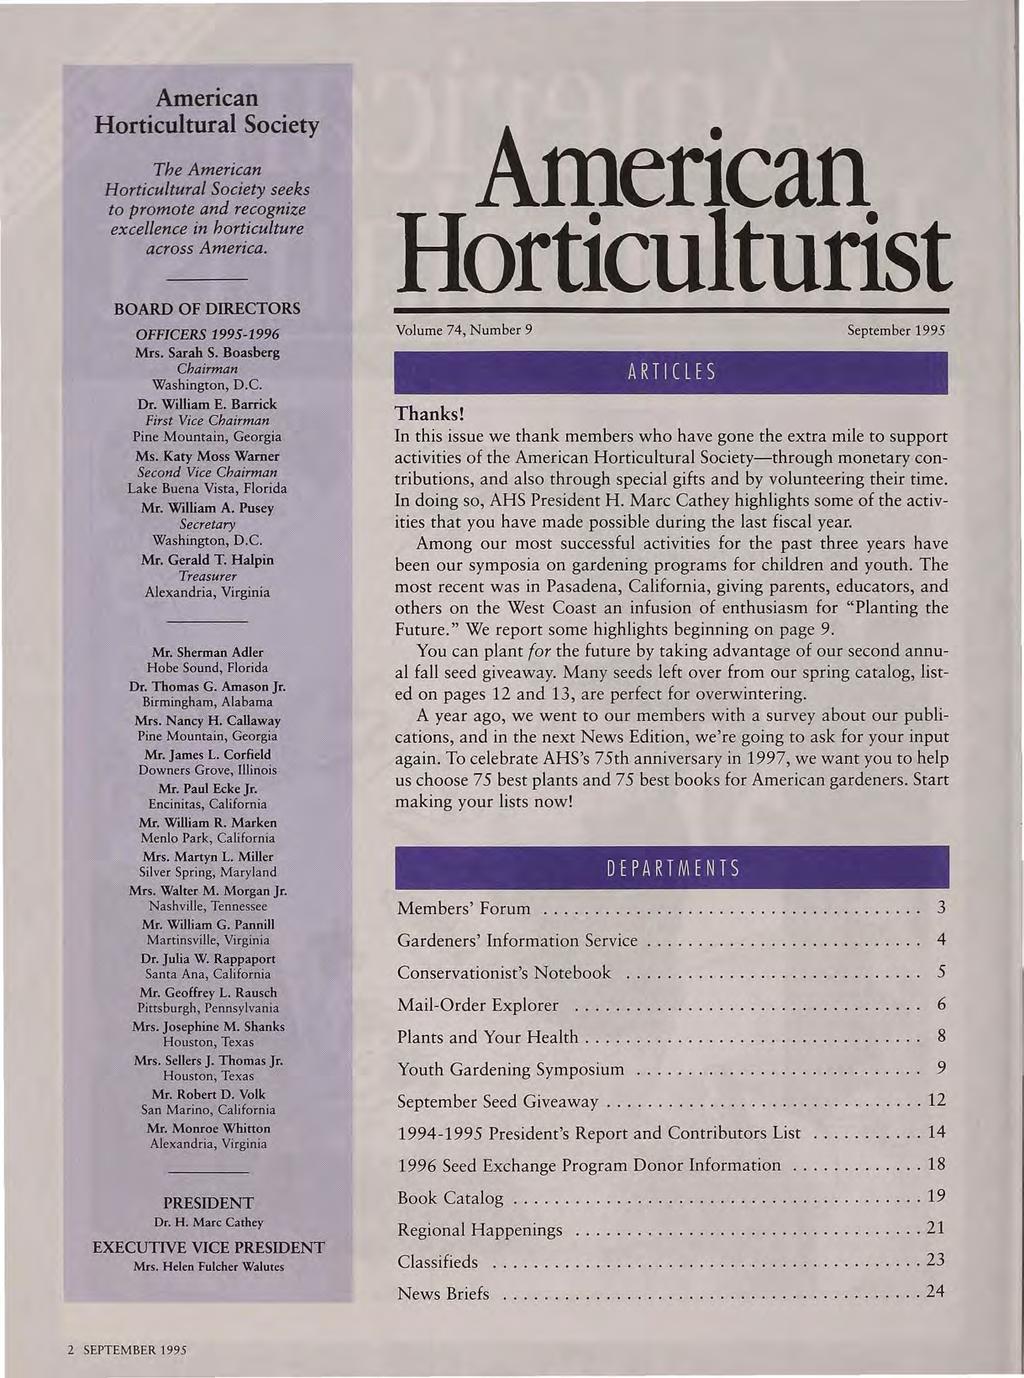 American Horticultural Society The American Horticultural Society seeks to promote and recognize excellence in horticulture across America. BOARD OF DIRECTORS OFFICERS 1995-1996 Mrs. Sarah S.